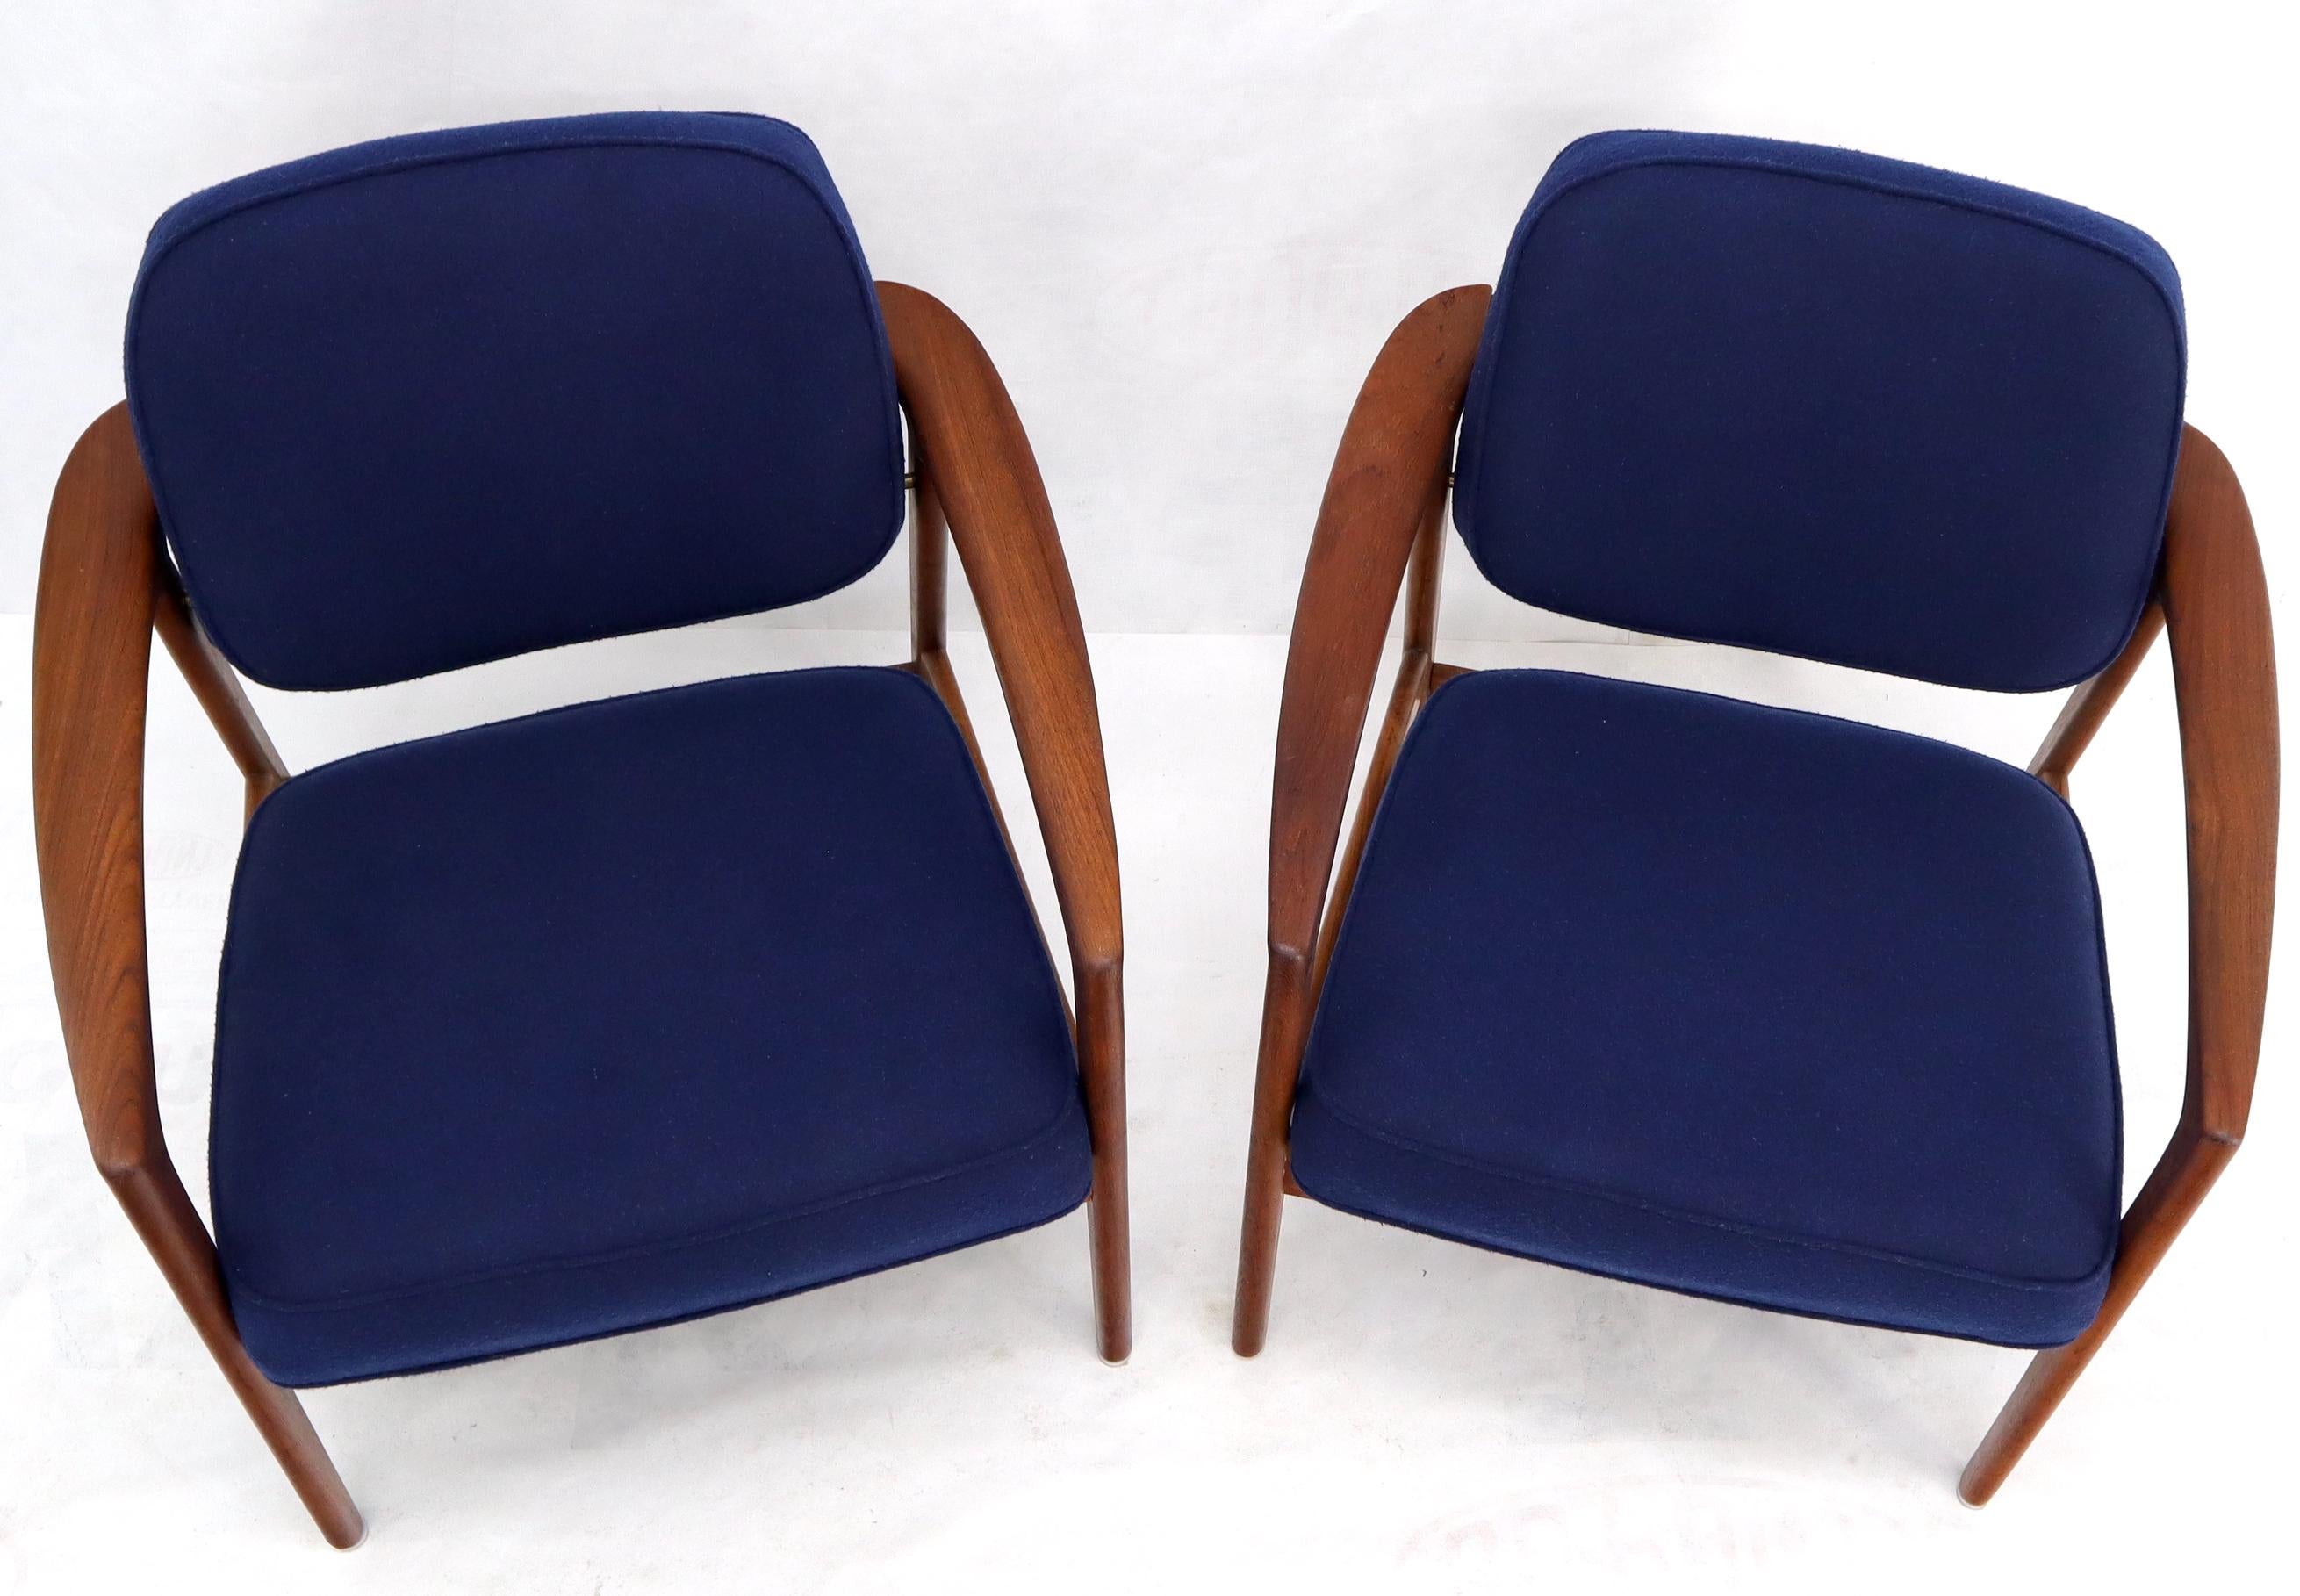 Pair of New Blue Upholstery Teak Danish Mid-Century Modern Arm Lounge Chairs For Sale 1